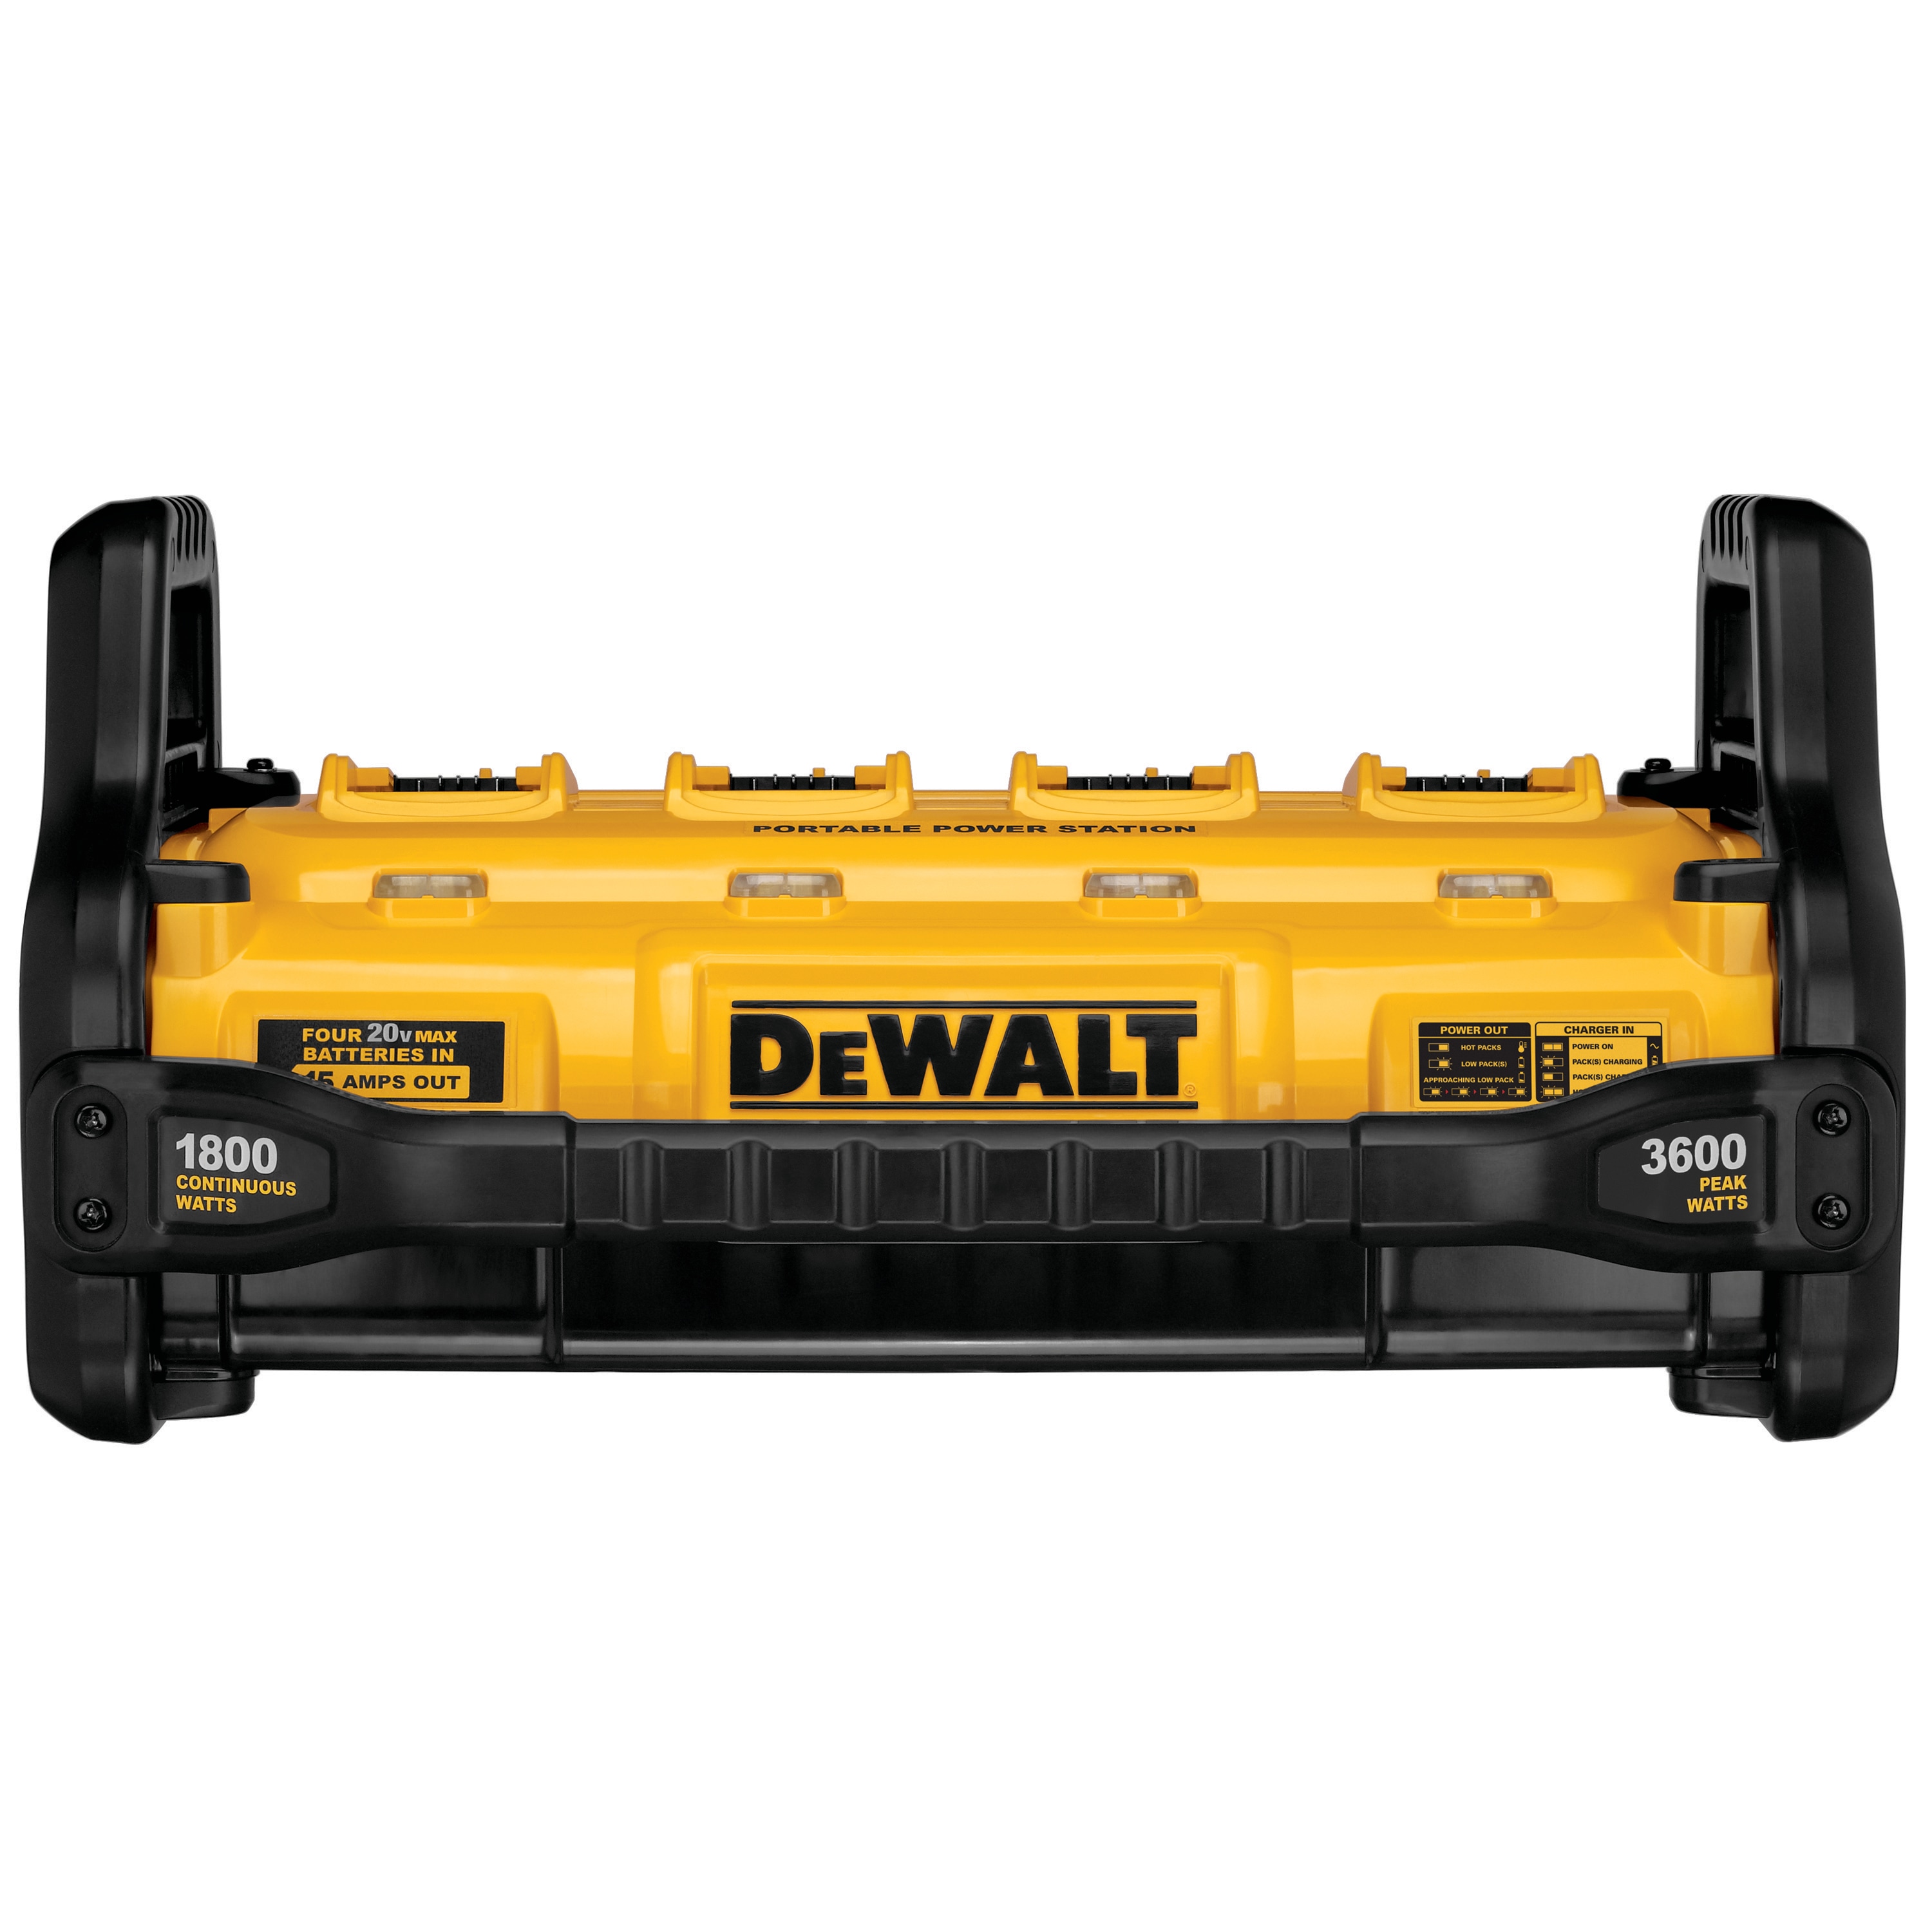 This DeWalt jump starter belongs in your car's emergency kit, and it's 20%  off pre-Black Friday at